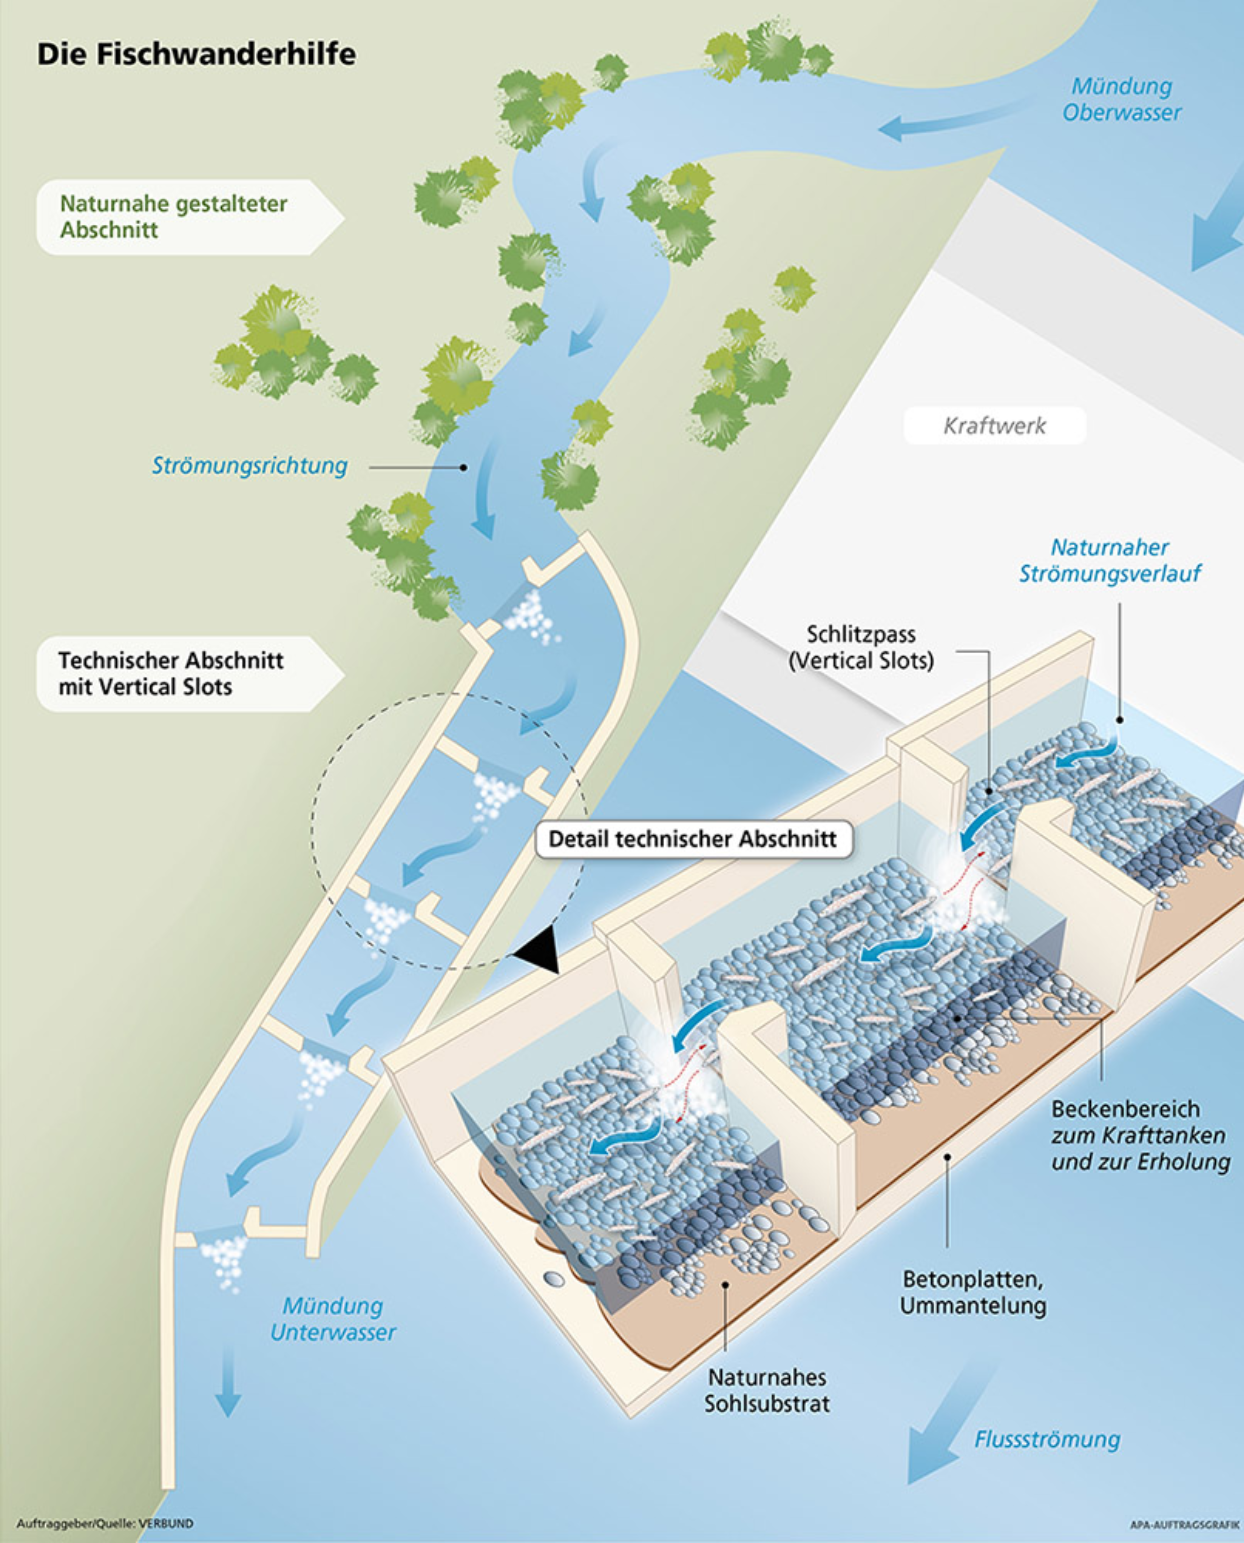 The picture shows a graphic that explains how various fish migration aids work. At the top you can see how the water flows into a near-natural section before the power station. In the area of the power station, where there is a difference in height before and after the power station, vertical sections have been created for fish, where pools have been set up for recreation in order to make the descent and ascent as gentle as possible for fish. The lower section shows how the fish migration aid flows back into the river.